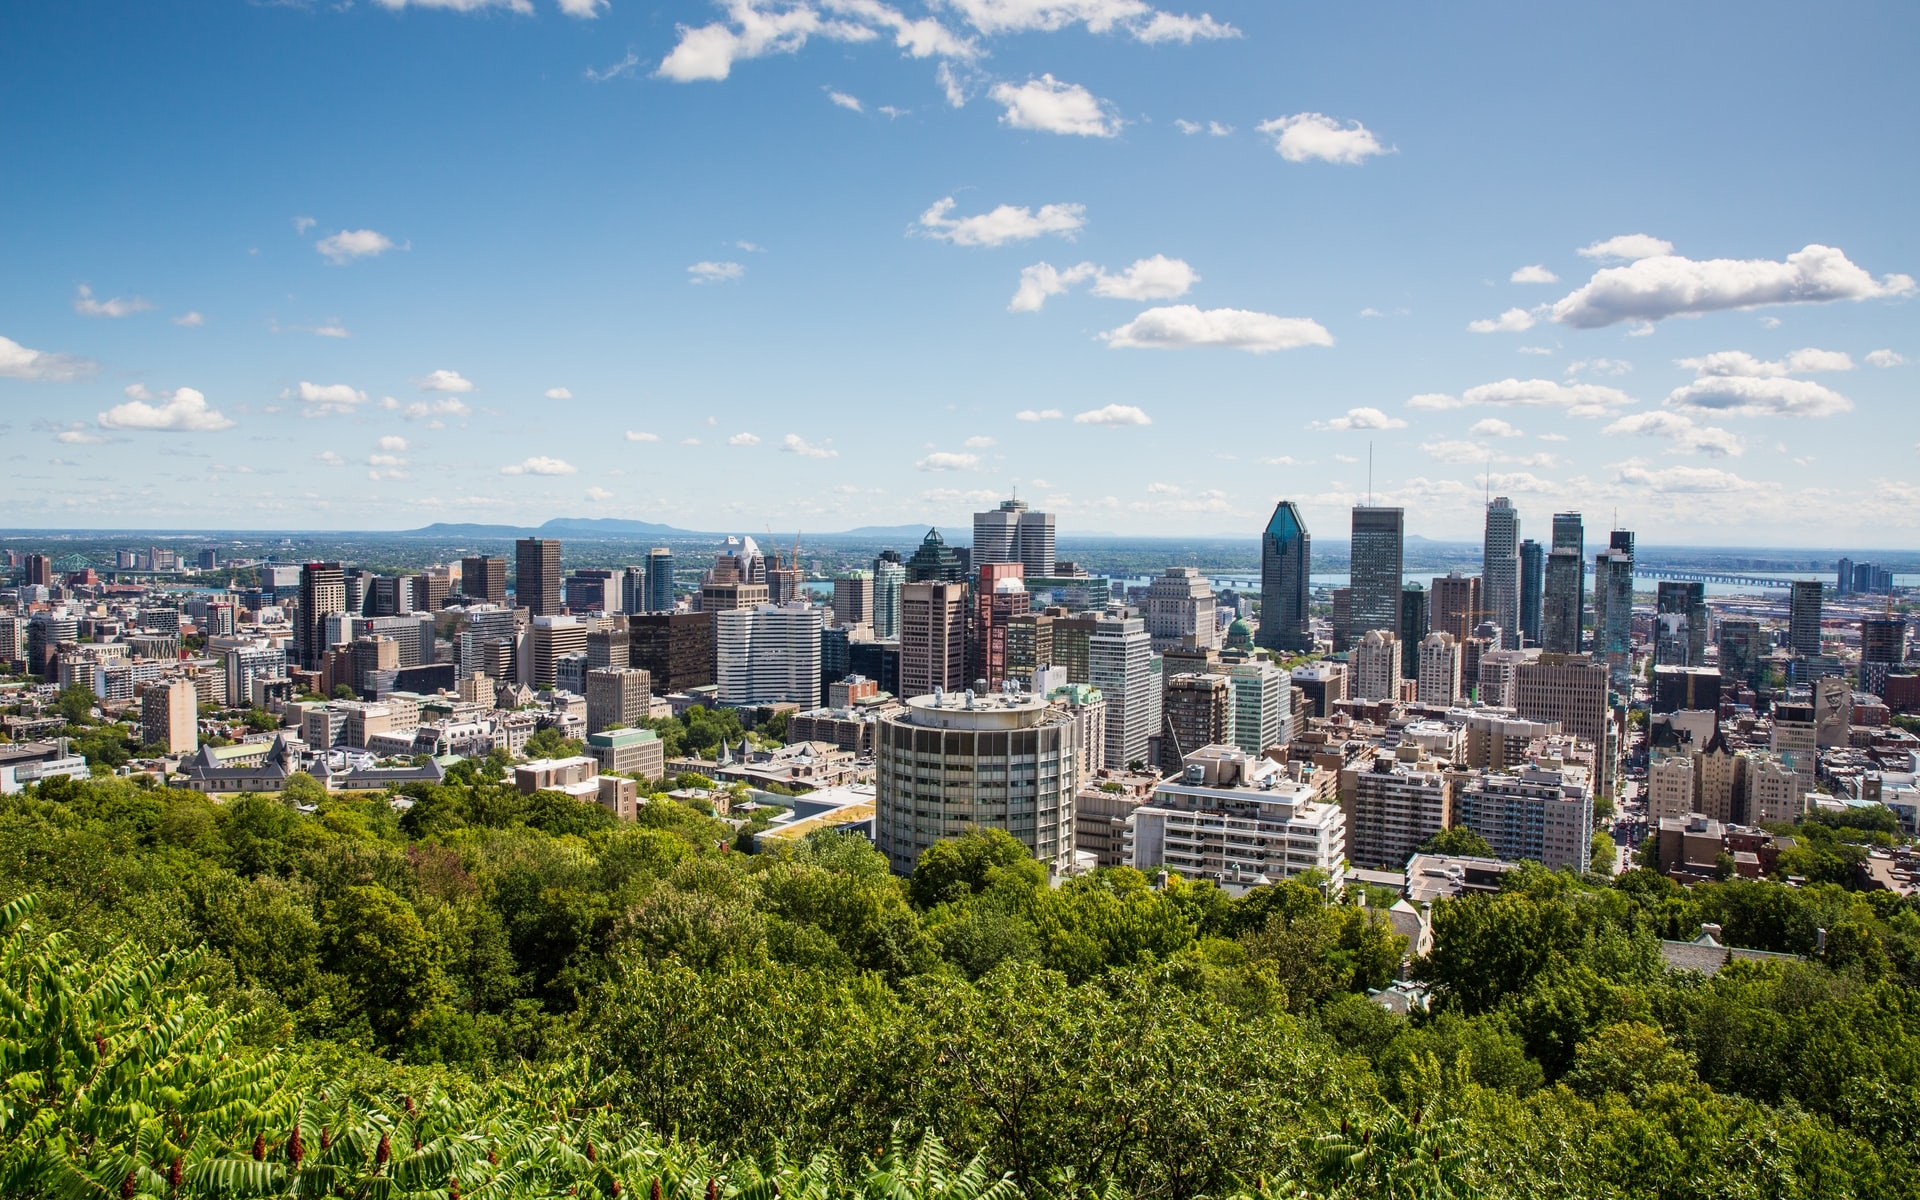 Panoramic photograph of the city of Montreal